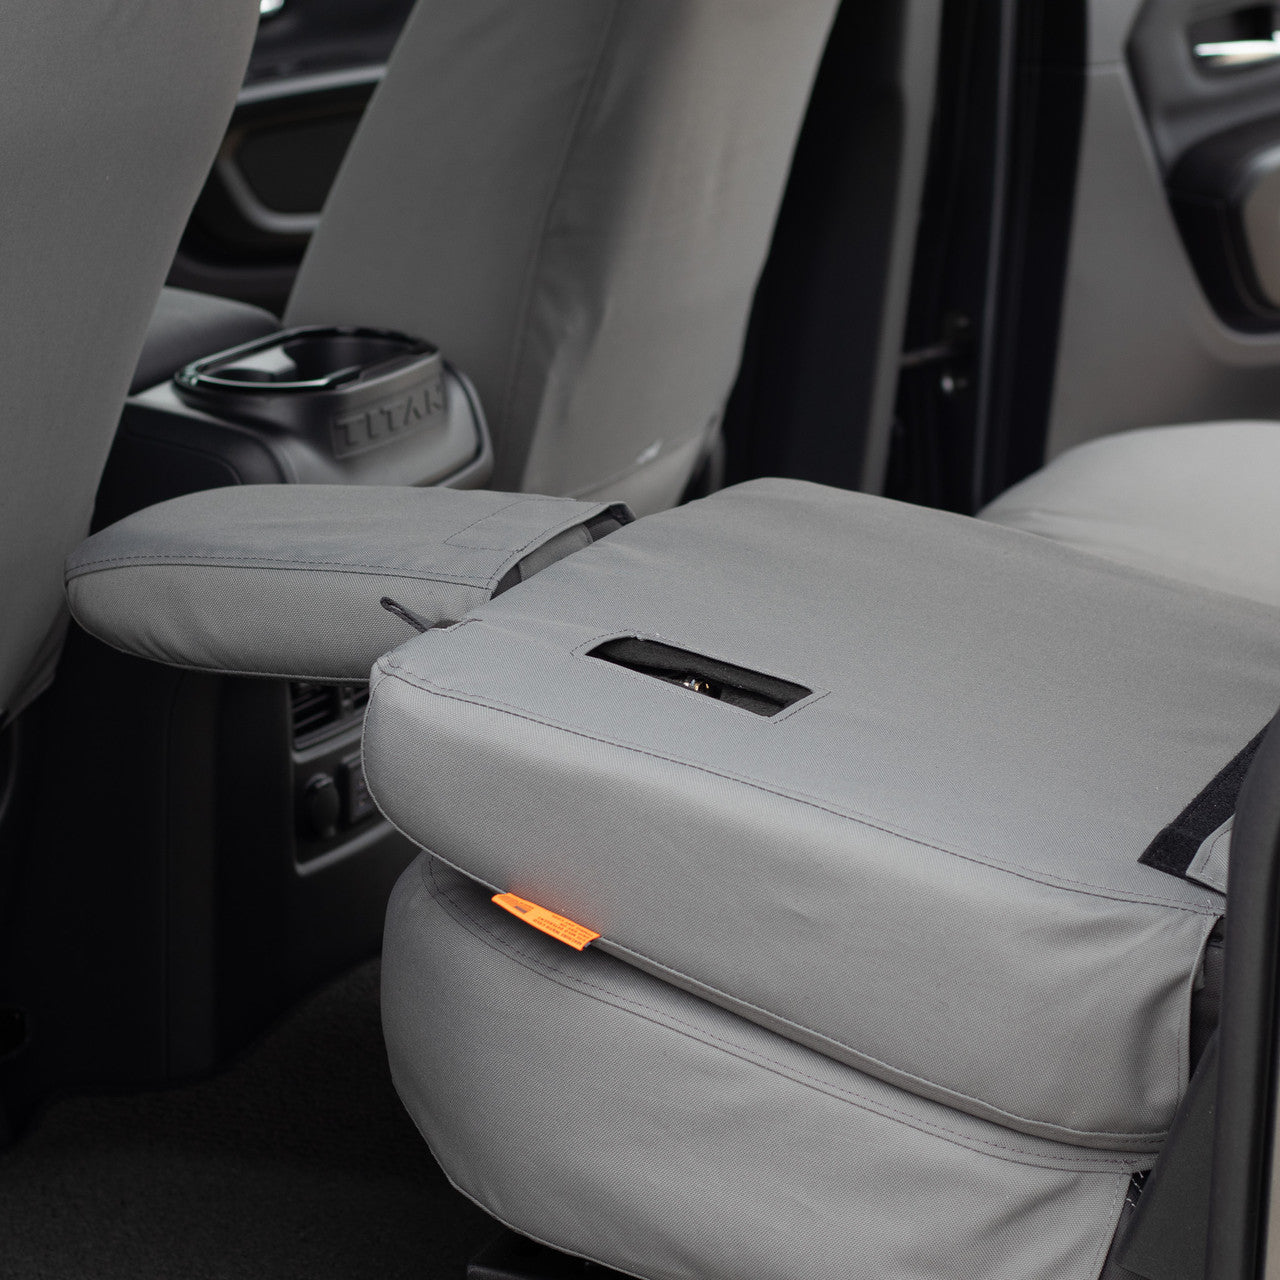 TigerTough Rear Seat Covers for the Nissan Titan.